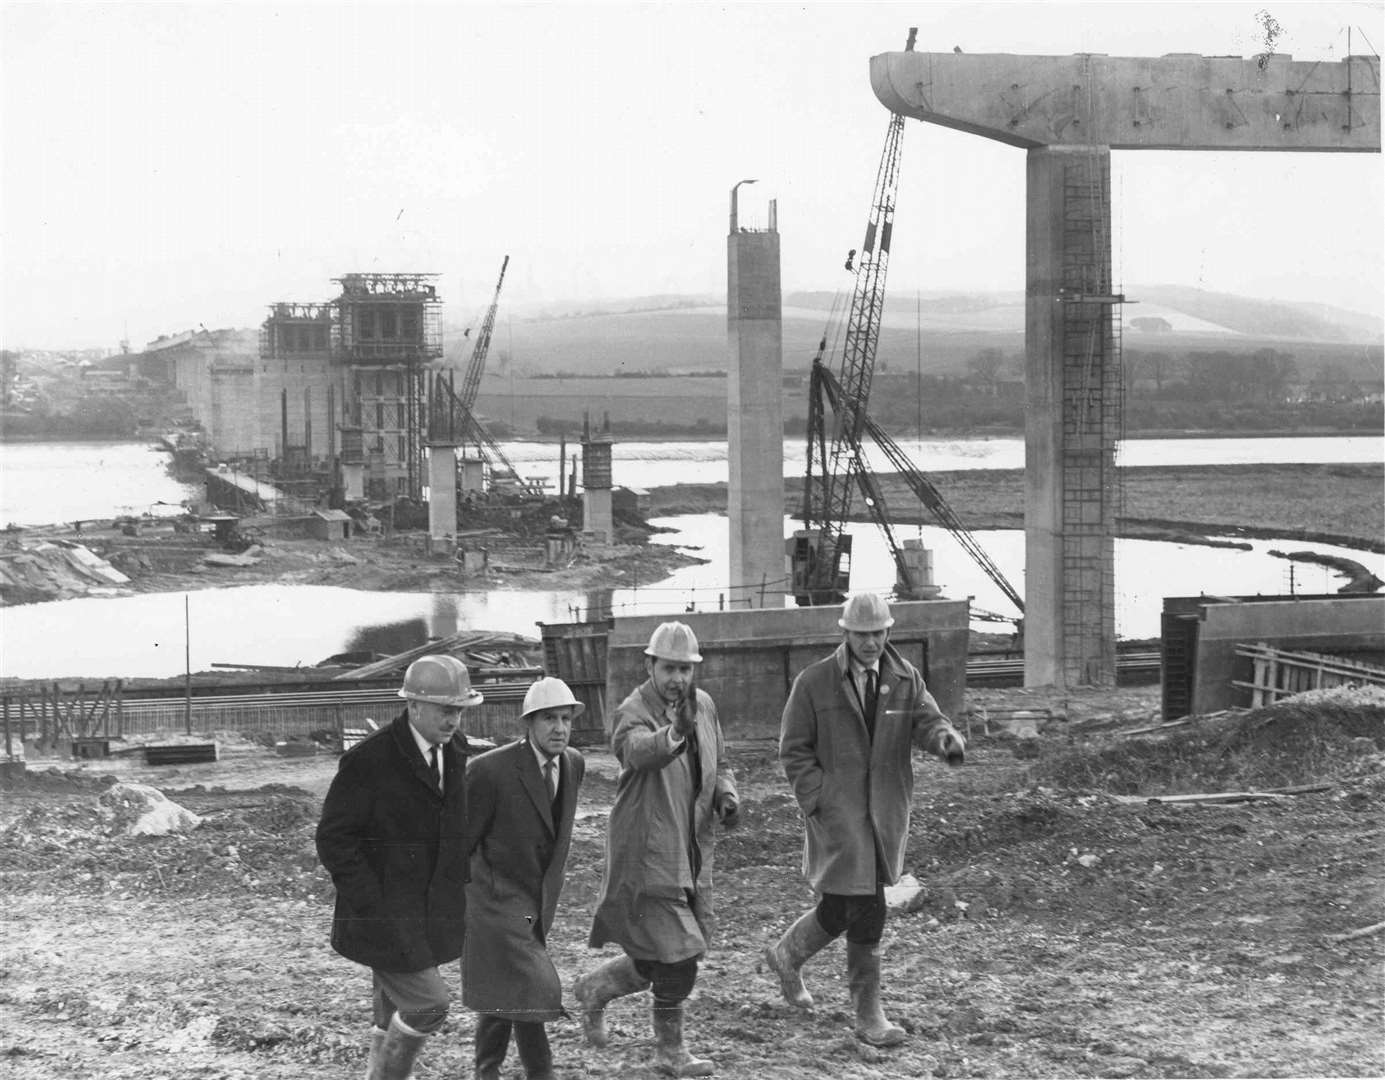 Transport minister Ernest Marples, second from the left, visited the site of the M2 motorway bridge at Rochester as it neared completion in 1962. He said it would pass ''one of the worst bottlenecks on the A2"